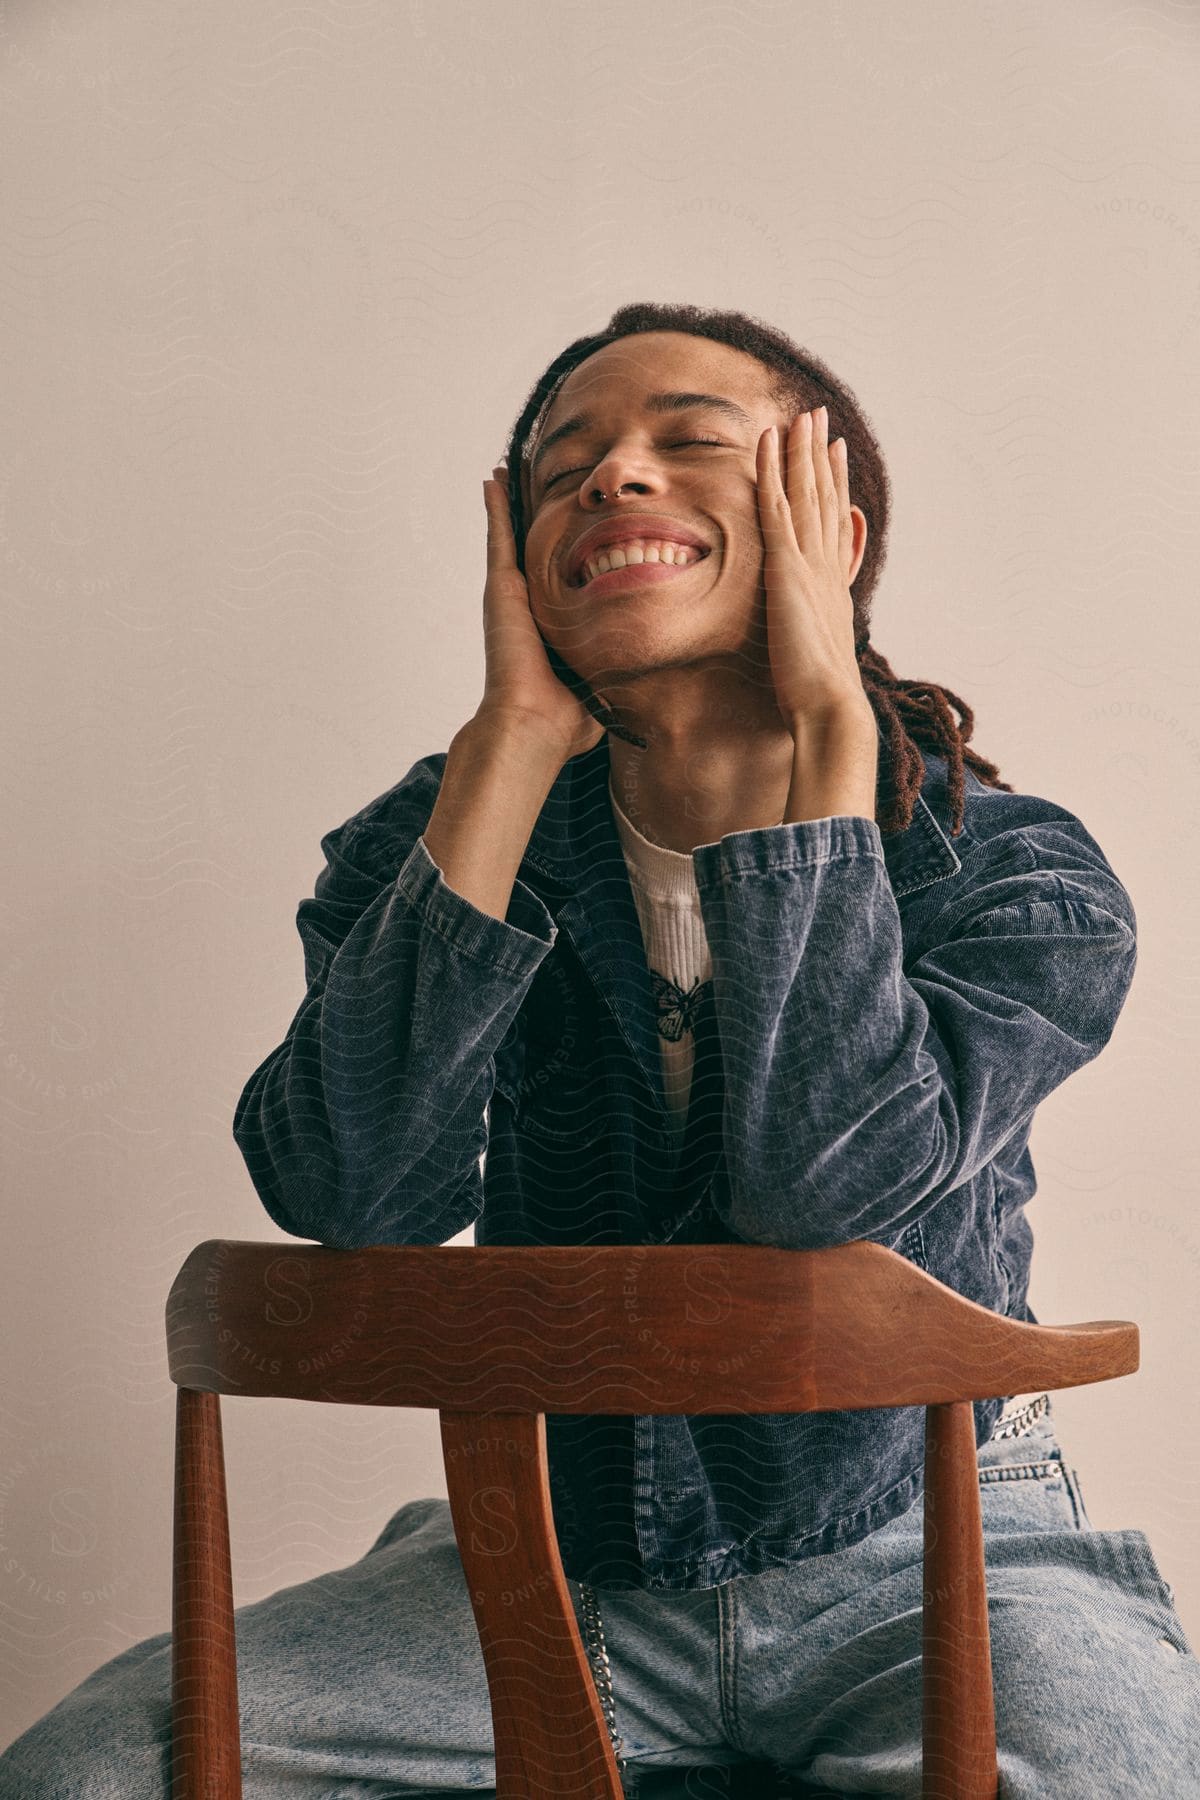 Man with dreadlocks sitting in a chair, sculpting, smiling, and wearing denim clothes.